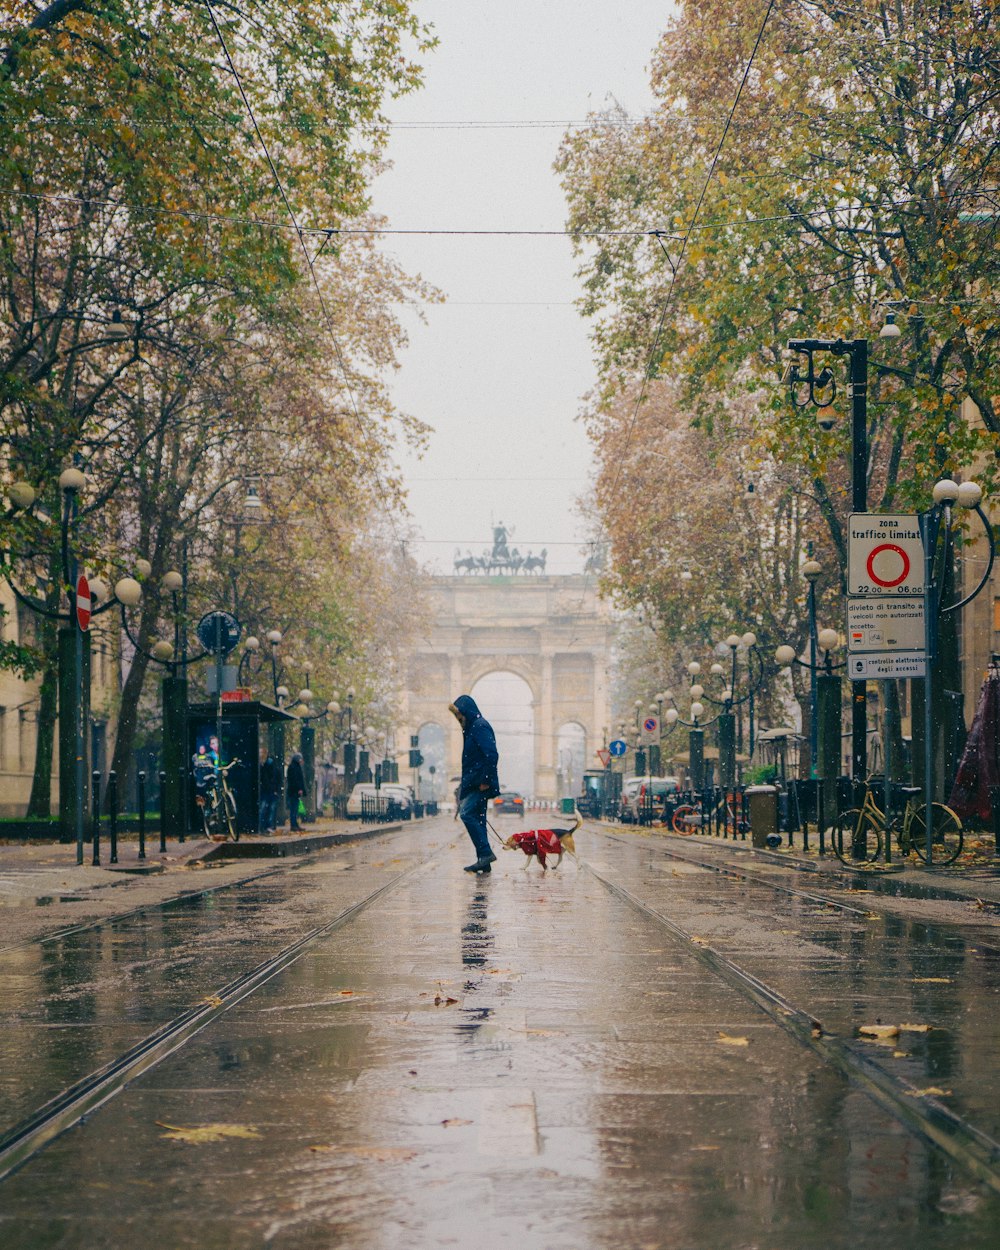 a person walking down a wet street with an umbrella